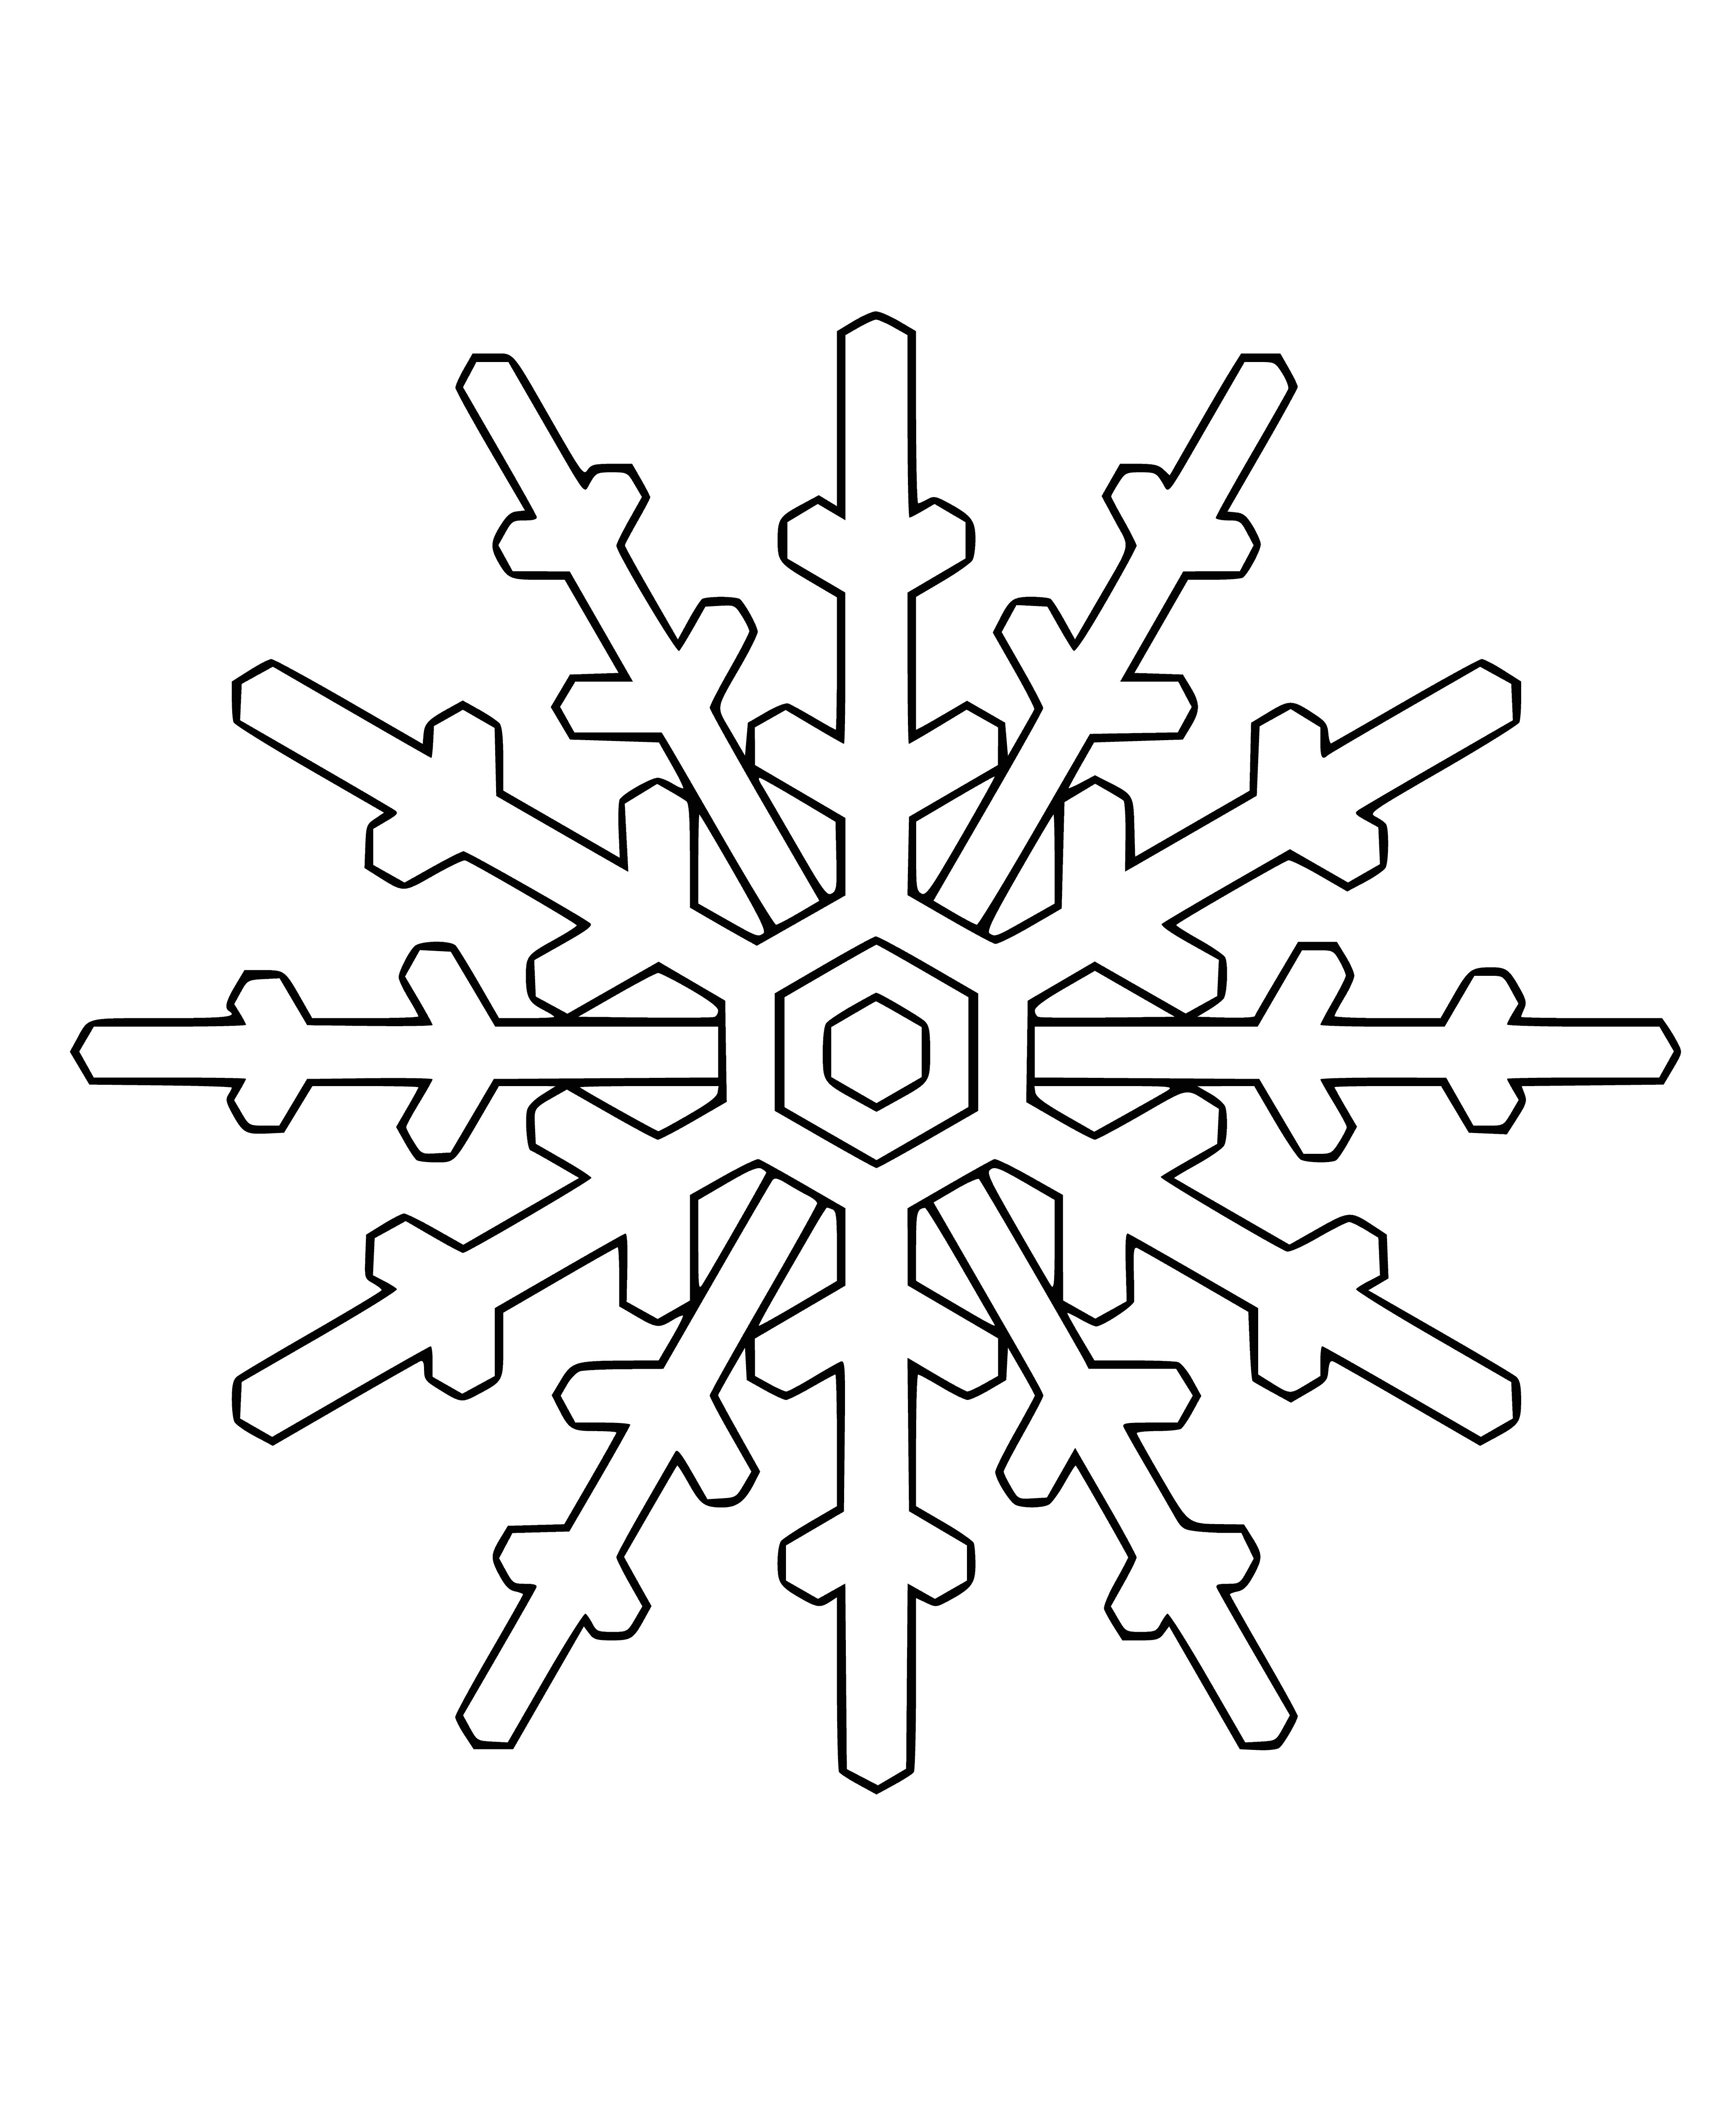 Beautiful snowflakes of various sizes, shapes, and patterns fill the coloring page!